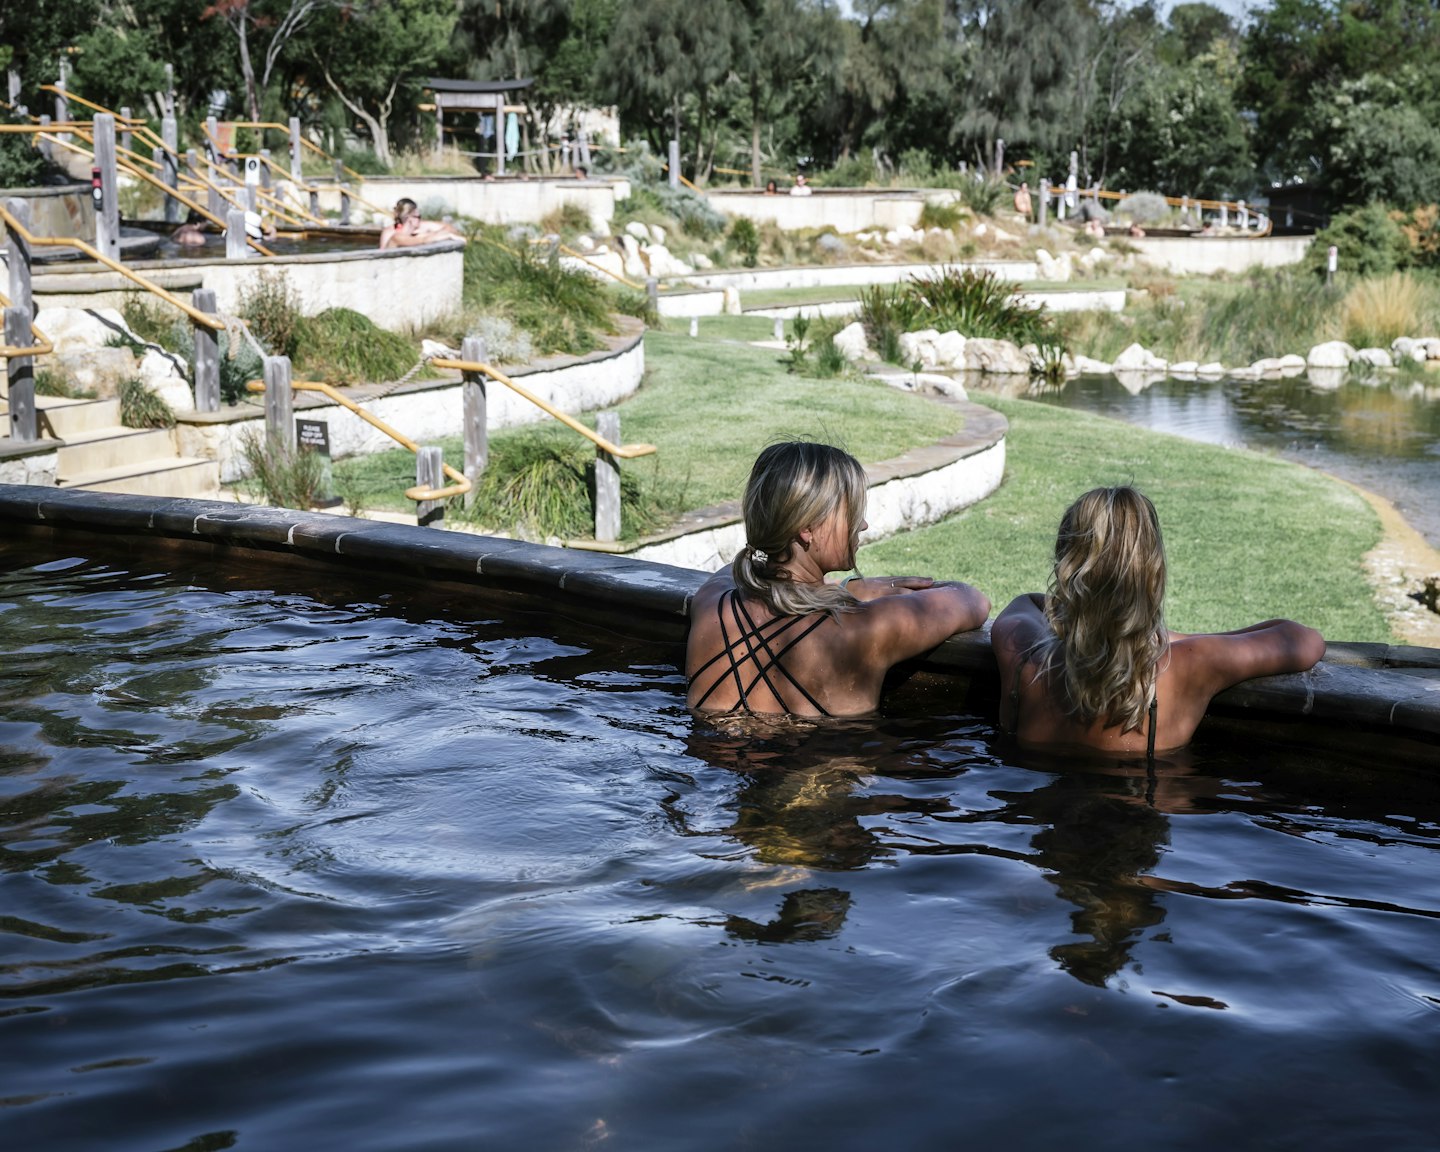 Backs of two girls sitting in geothermal pool looking out over view of nature